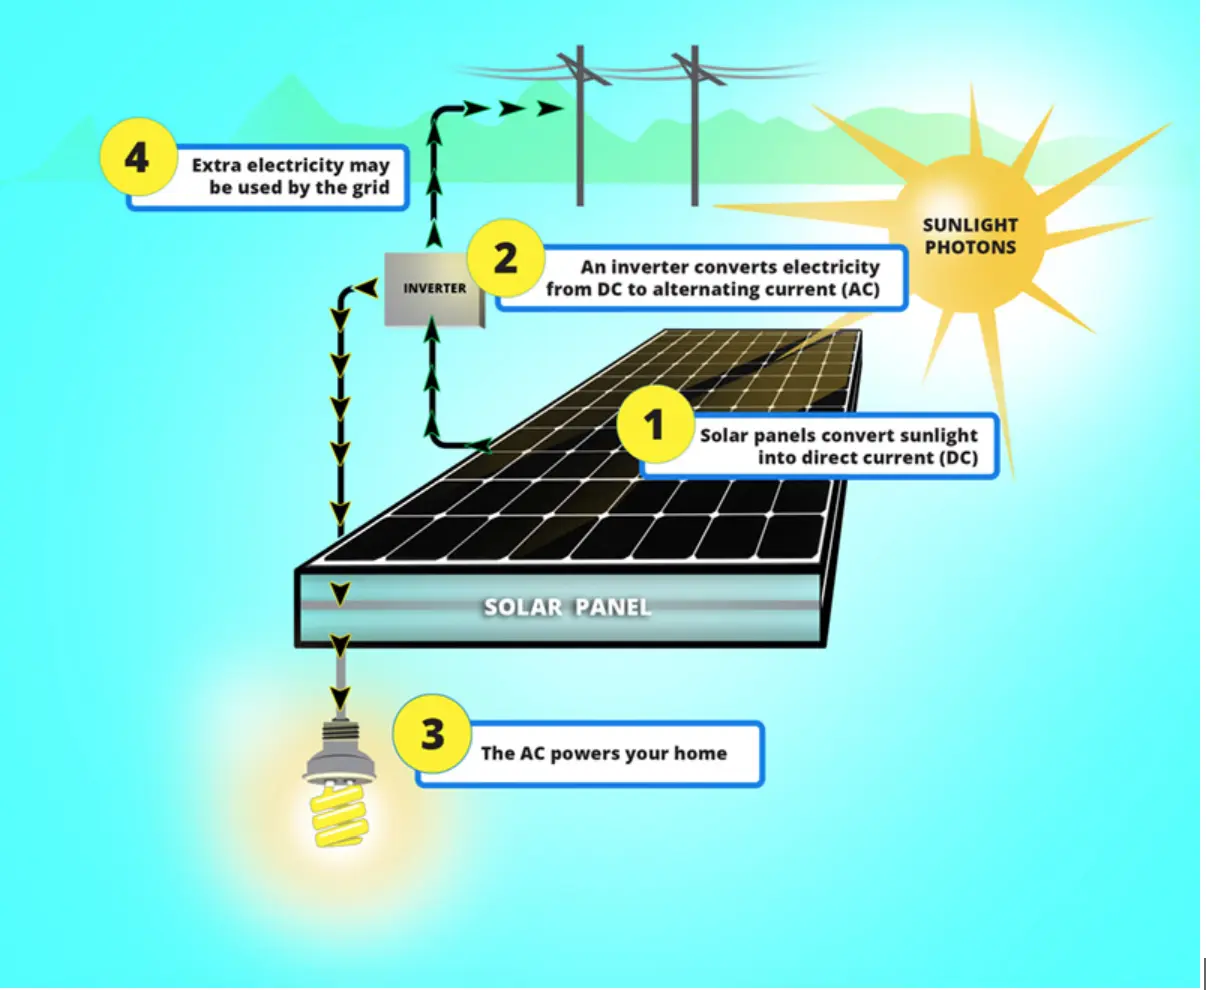 current conversion solar energy - What is the active solar energy conversion